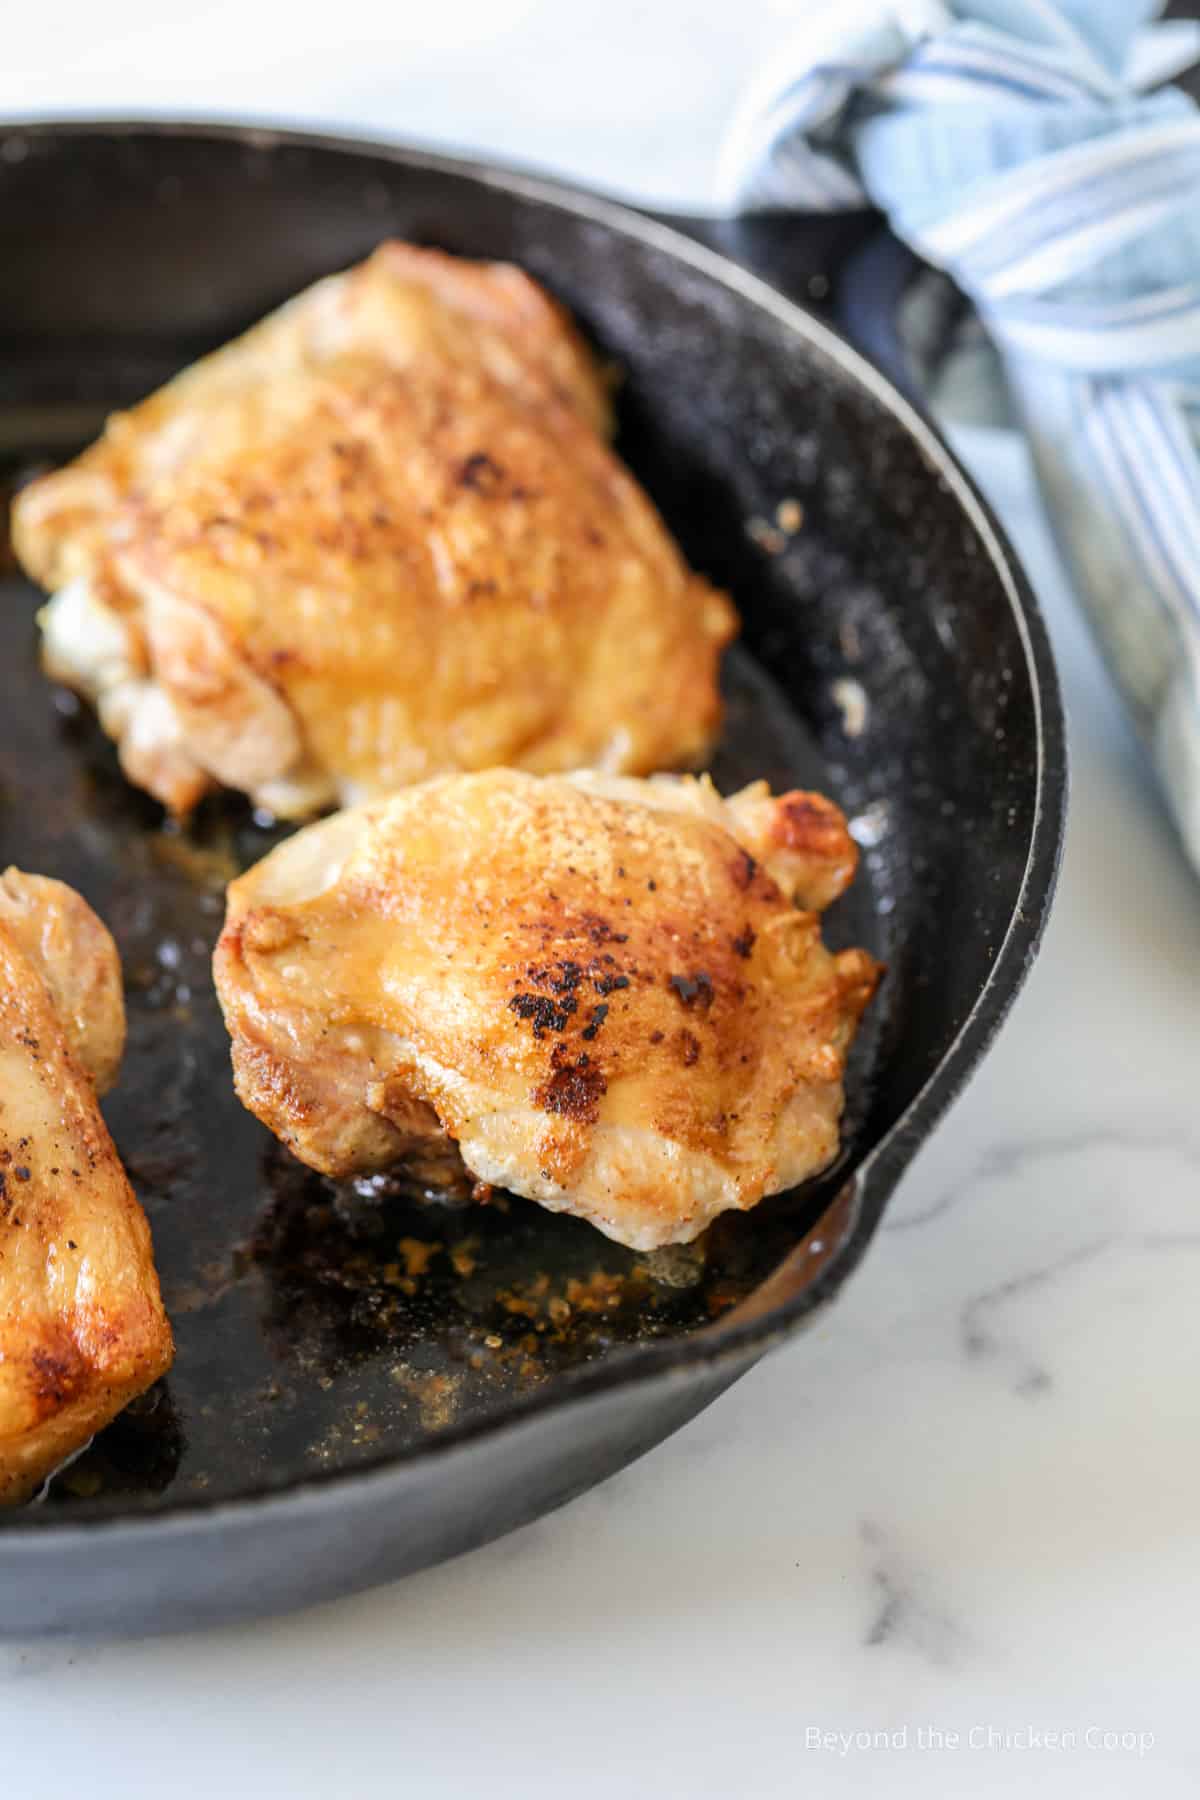 Cooked chicken in a cast iron skillet.